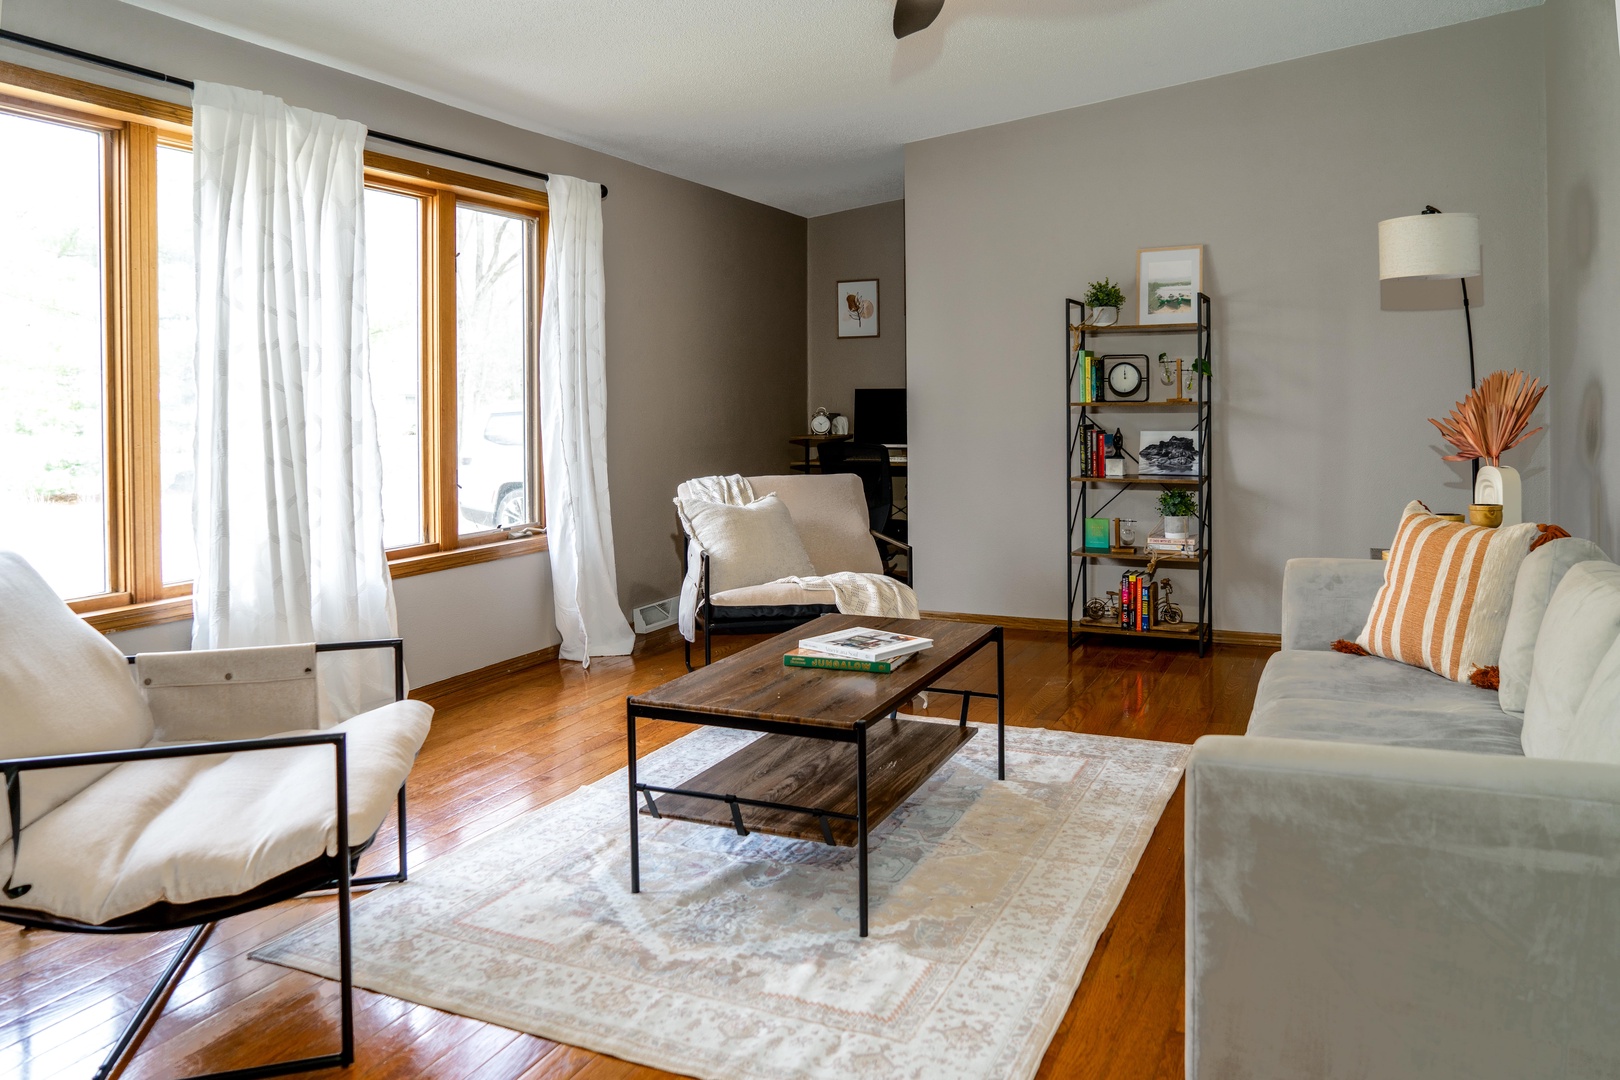 Enjoy relaxation in the second living room, complete with a workspace area